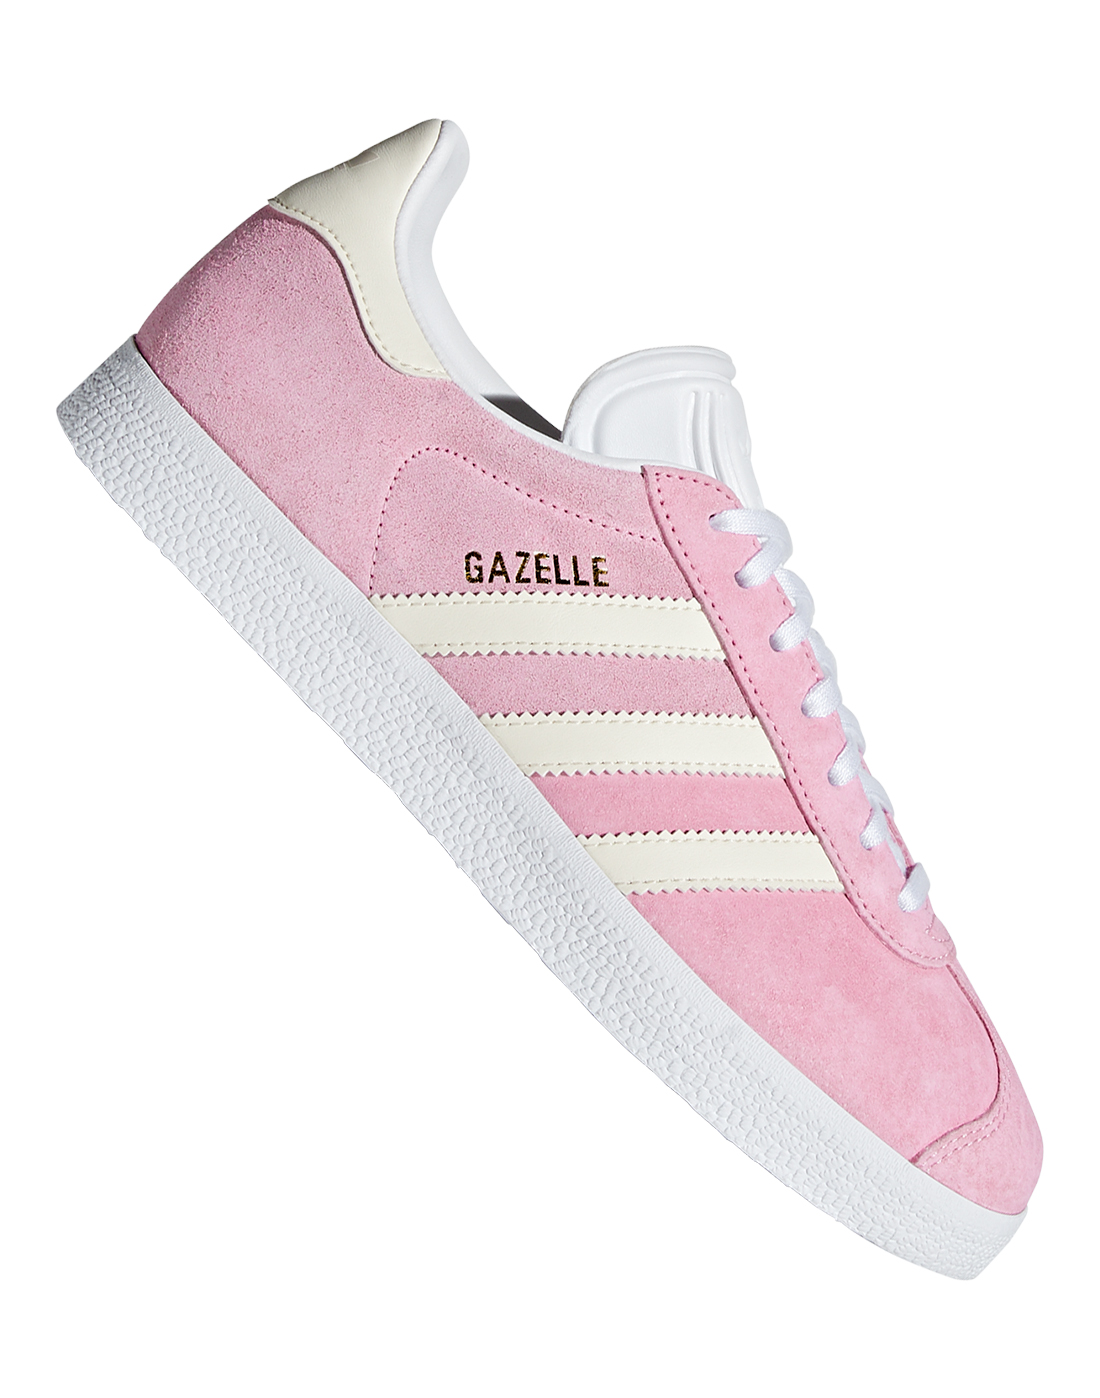 Shop Pink Adidas Online Nordstrom | atelier-yuwa.ciao.jp